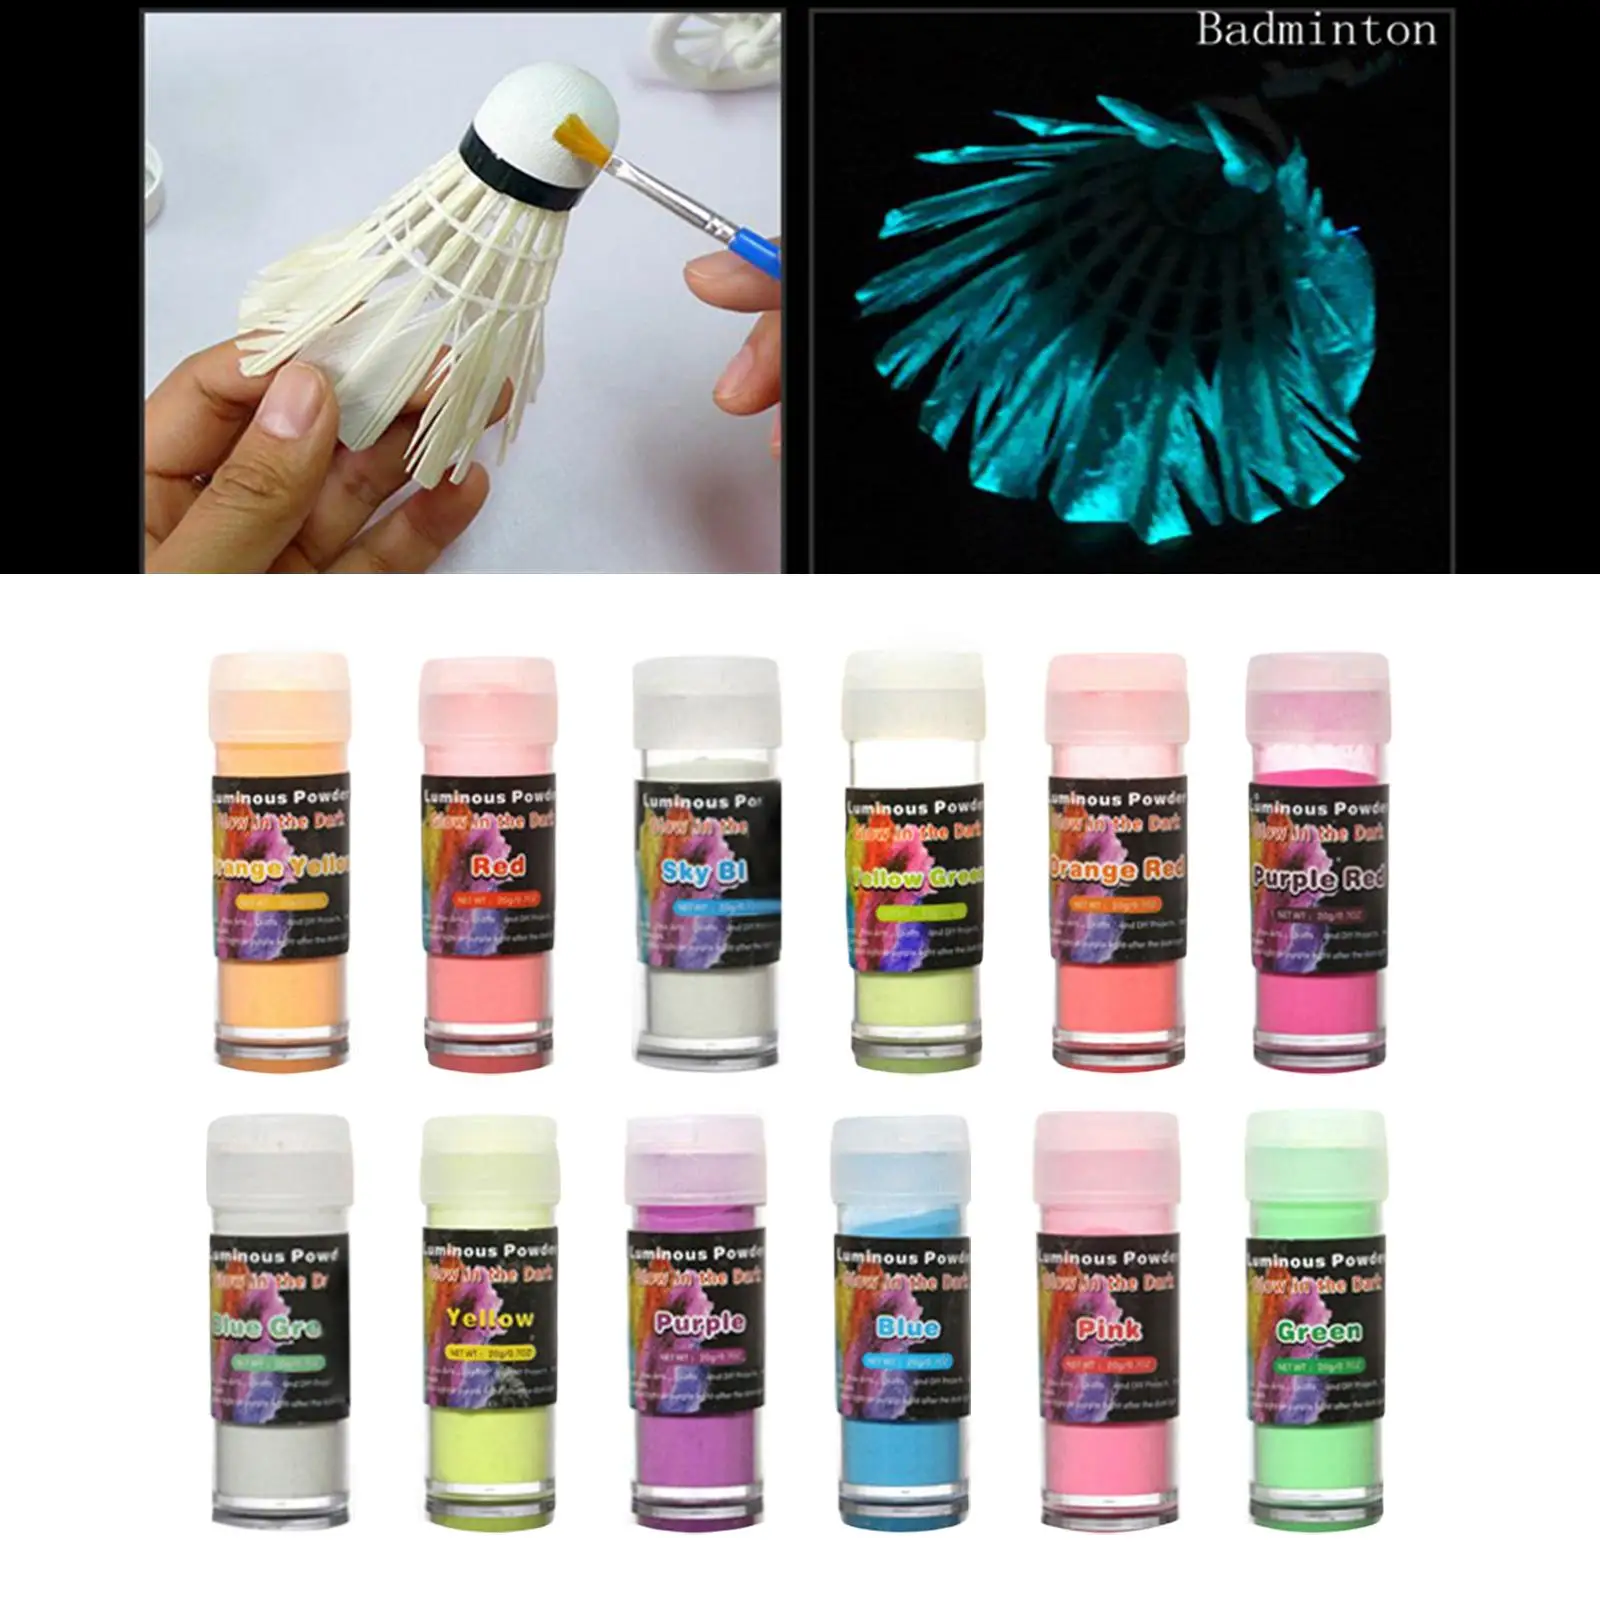 12x Luminous Powder 20G/Bottle Glow in The Dark Pigment Set for Slime Nails